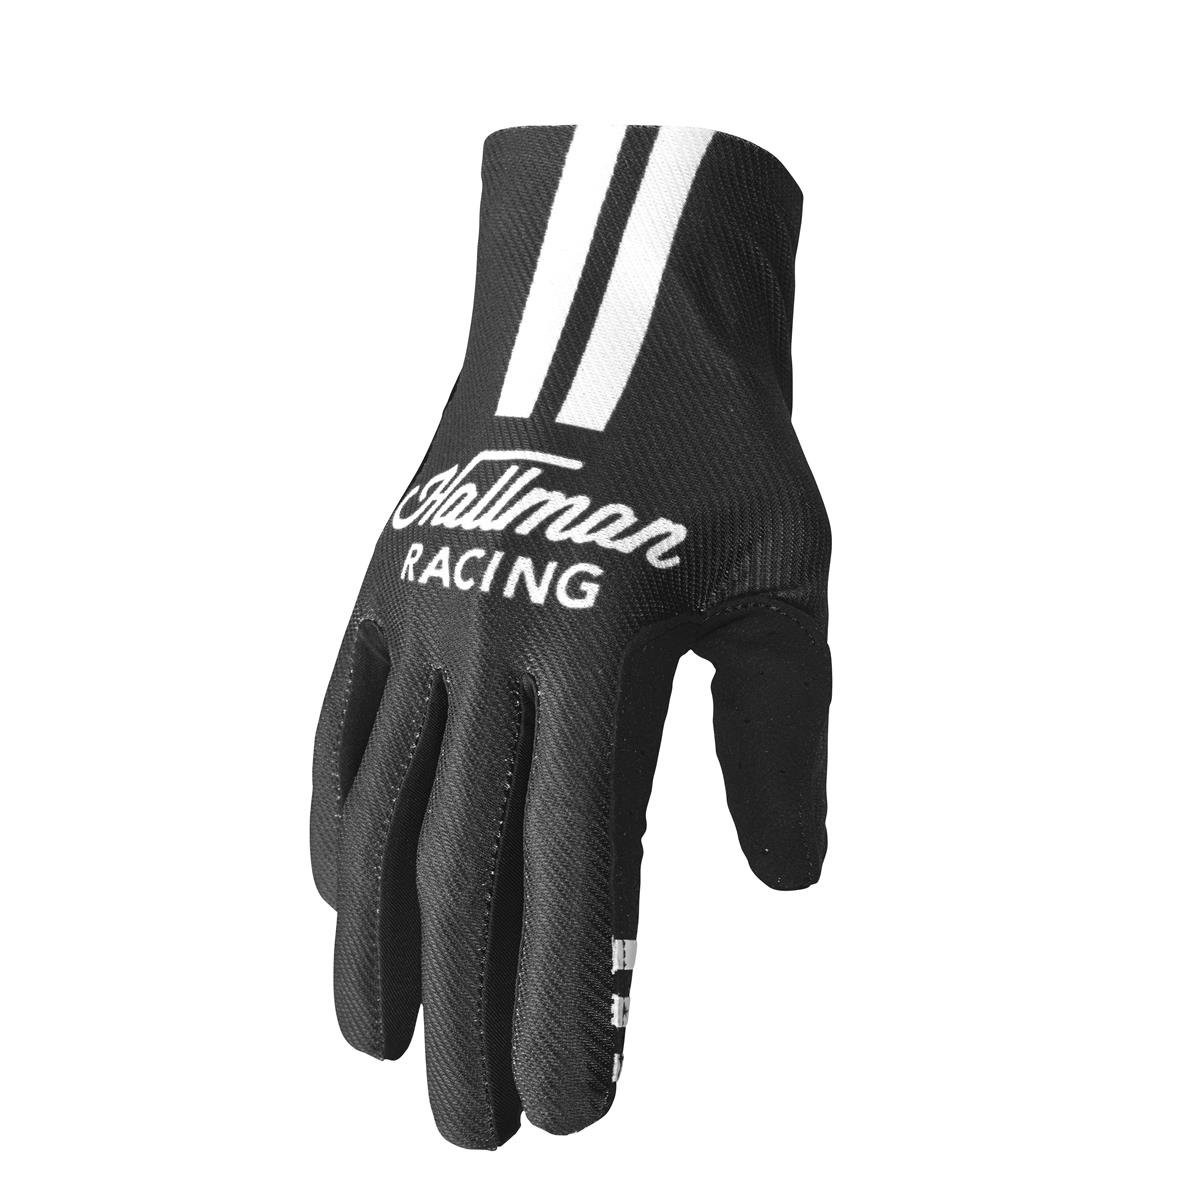 Thor Gloves Mainstay Roosted - Black/White